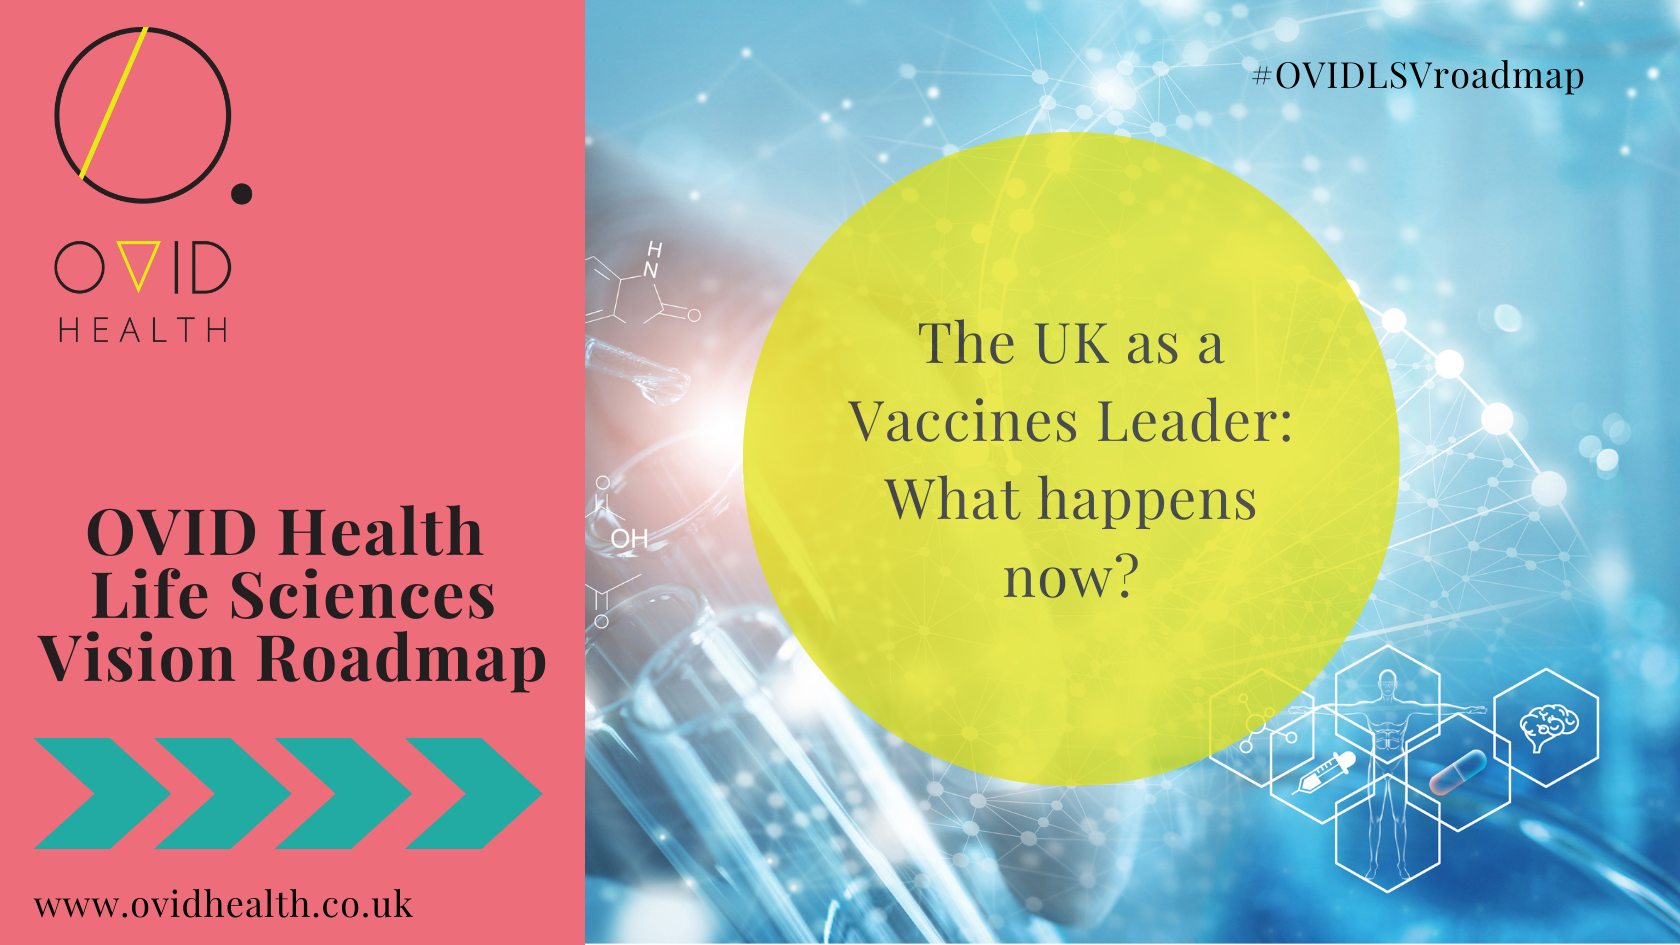 The UK as a Vaccines Leader: What happens now?